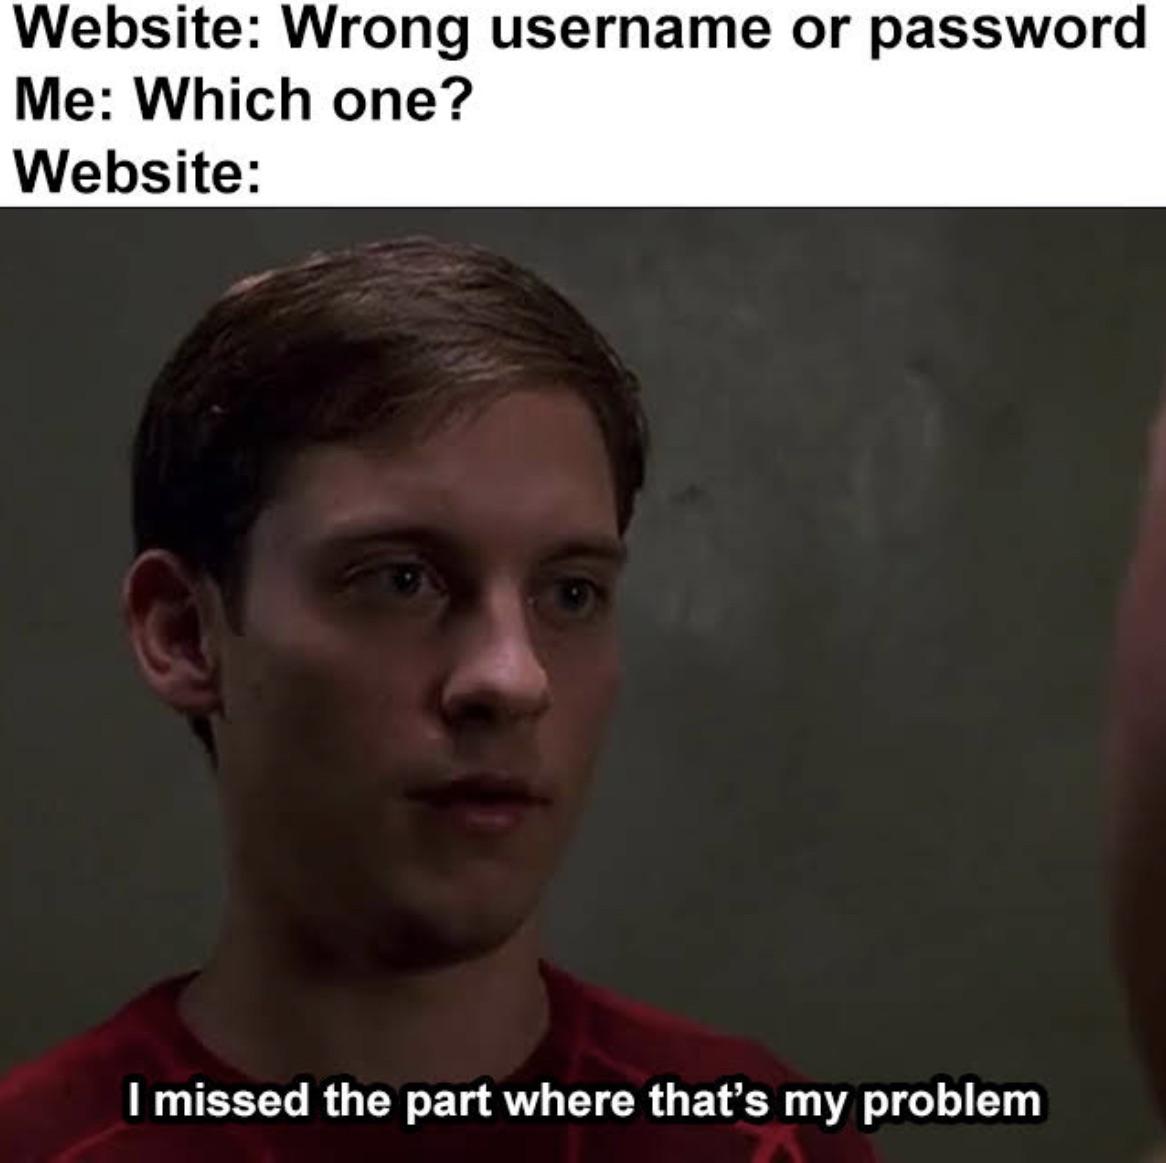 password protection - Website Wrong username or password Me Which one? Website I missed the part where that's my problem